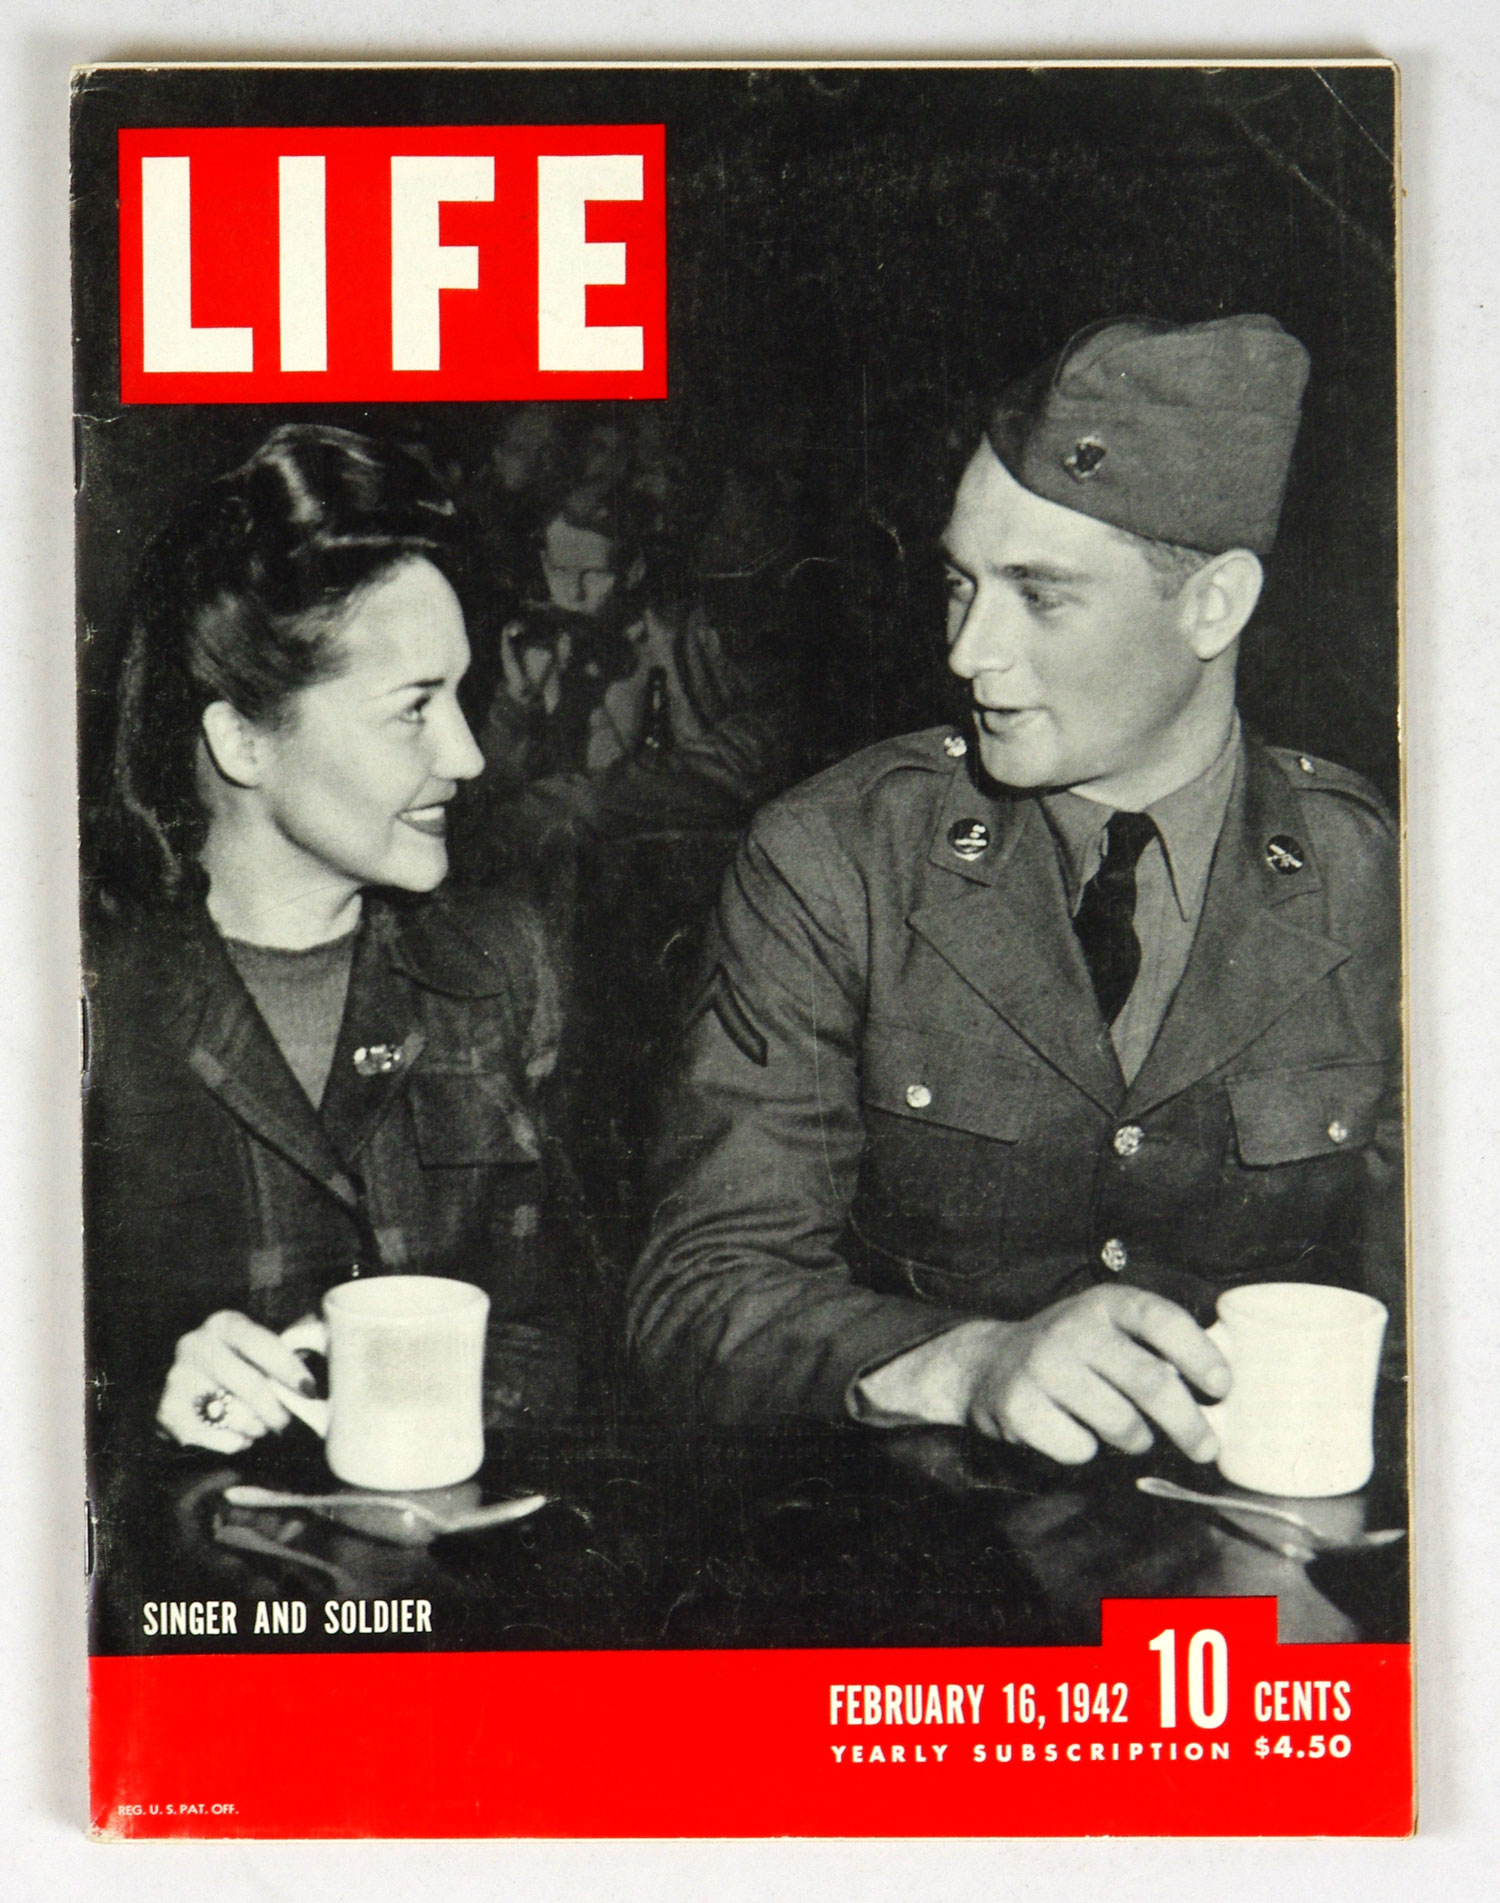 LIFE Magazine Back Issue 1942 February 16 Singer and Soldier